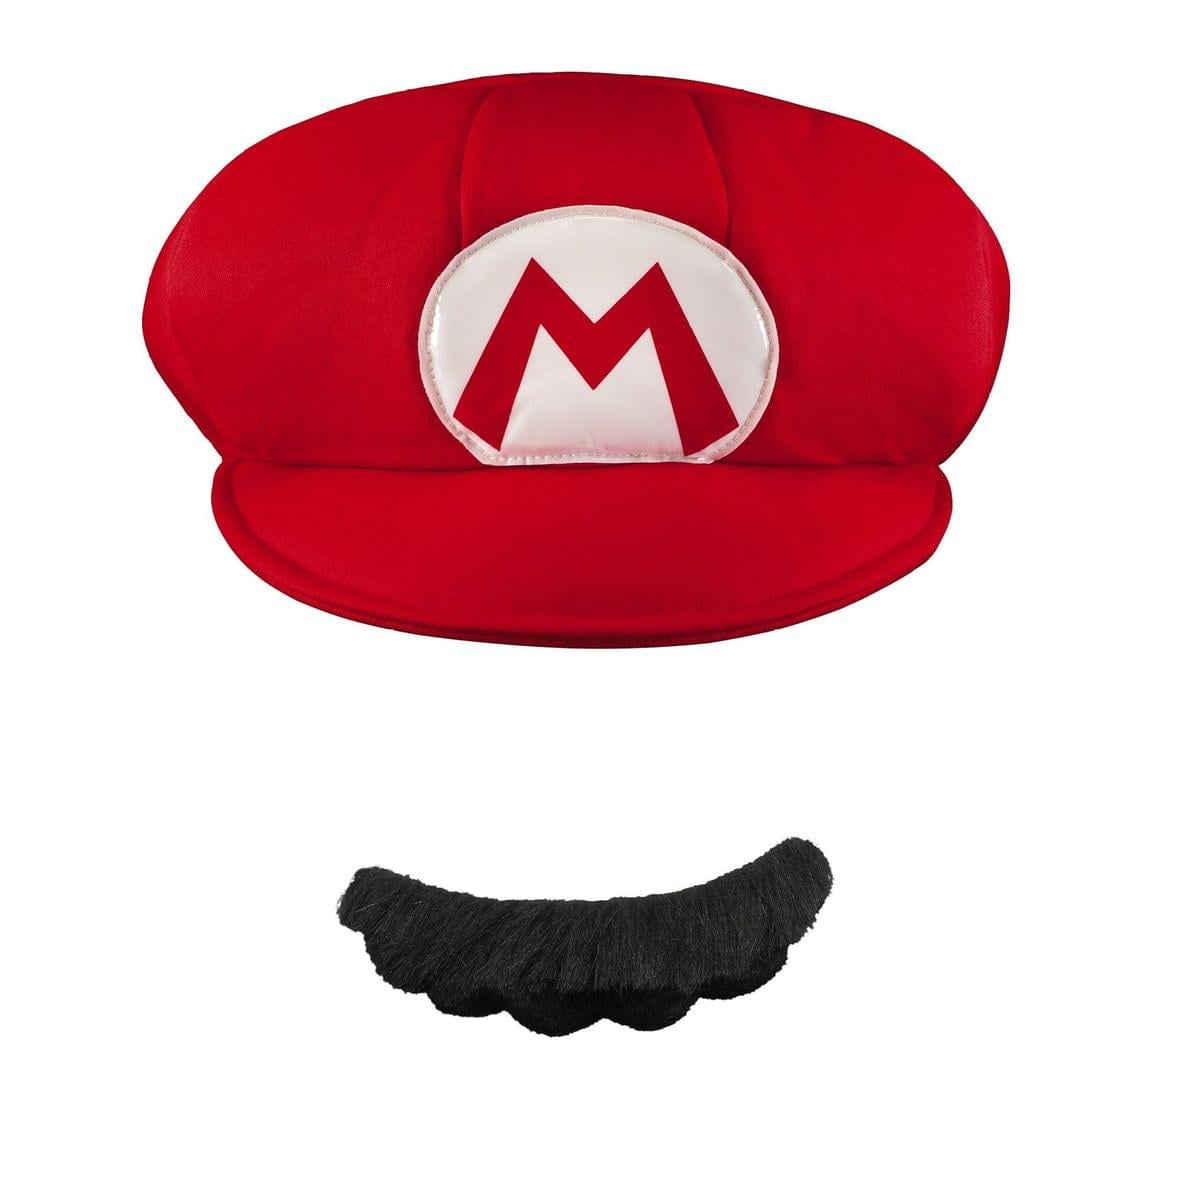 Super Mario Red Hat Gloves Mustache Adult Costume Accessory Kit 